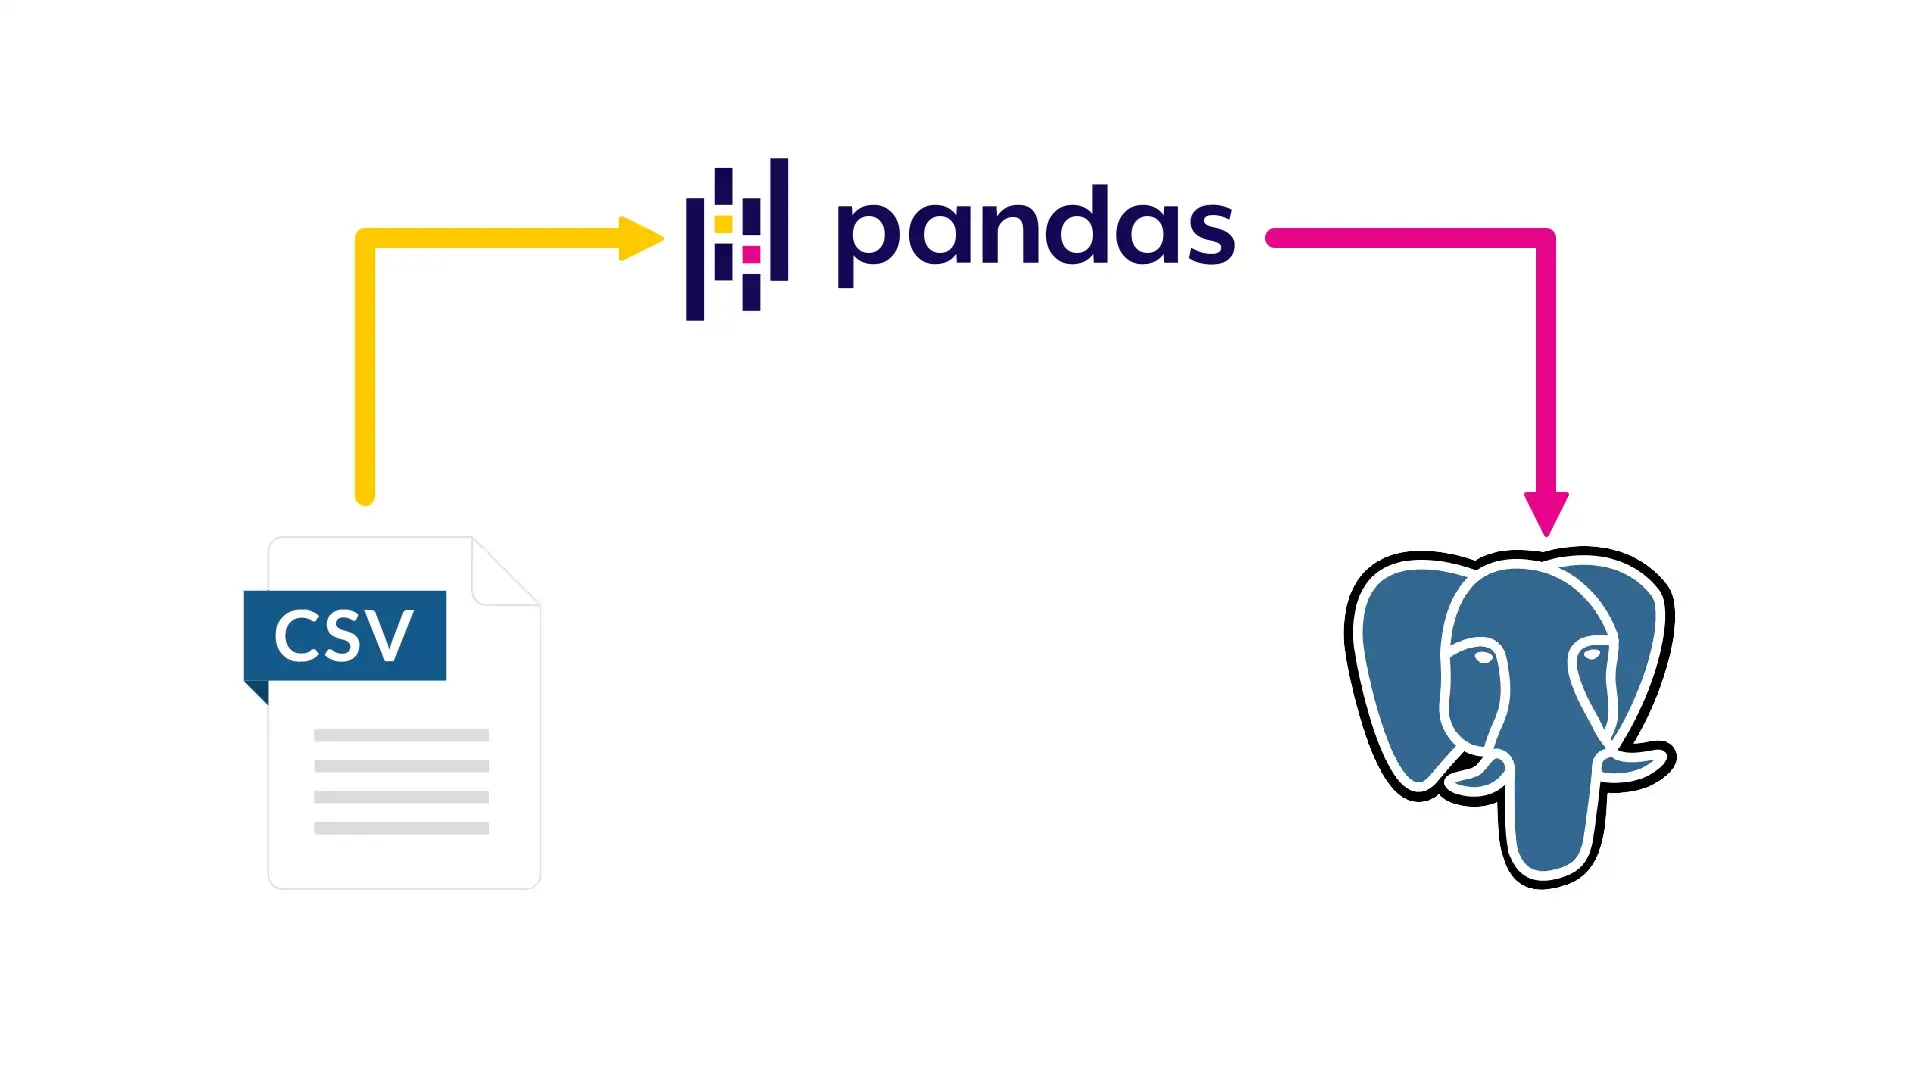 A flowchart from a CSV file icon to the Pandas library icon to a Postgres database icon.